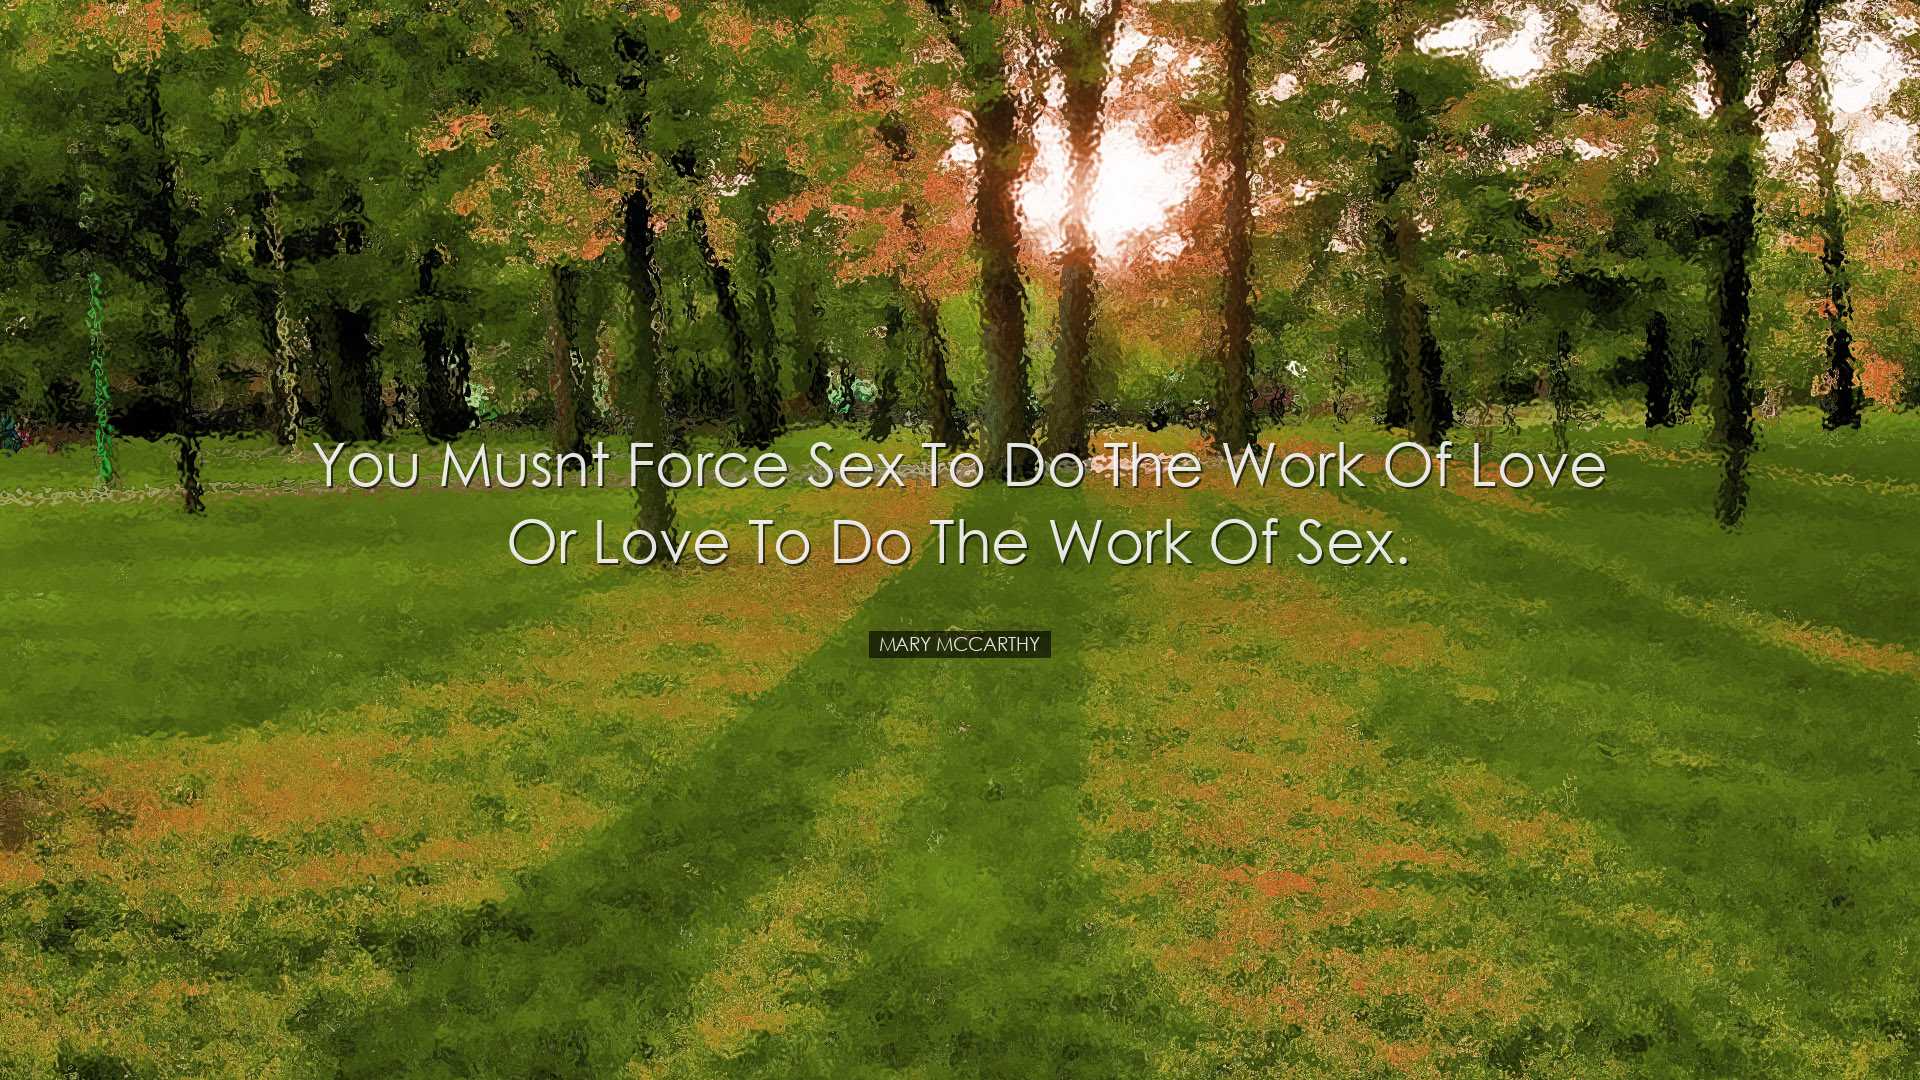 You musnt force sex to do the work of love or love to do the work